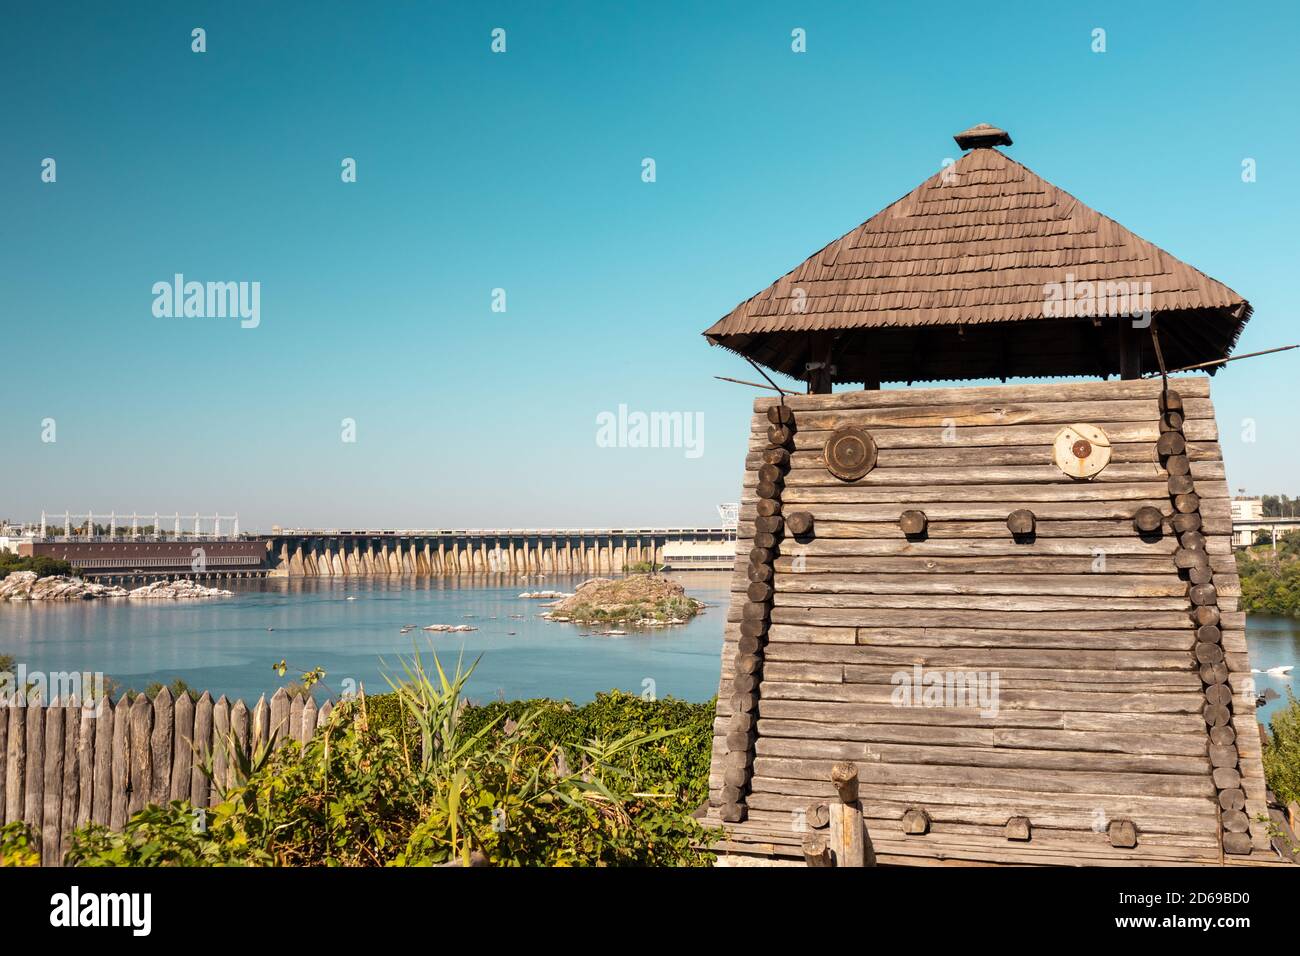 Watchtower in wooden medieval Zaporozhian Sich historical complex, view on DneproGES power station with blue clear bright sky. Khortytsia island on Dn Stock Photo